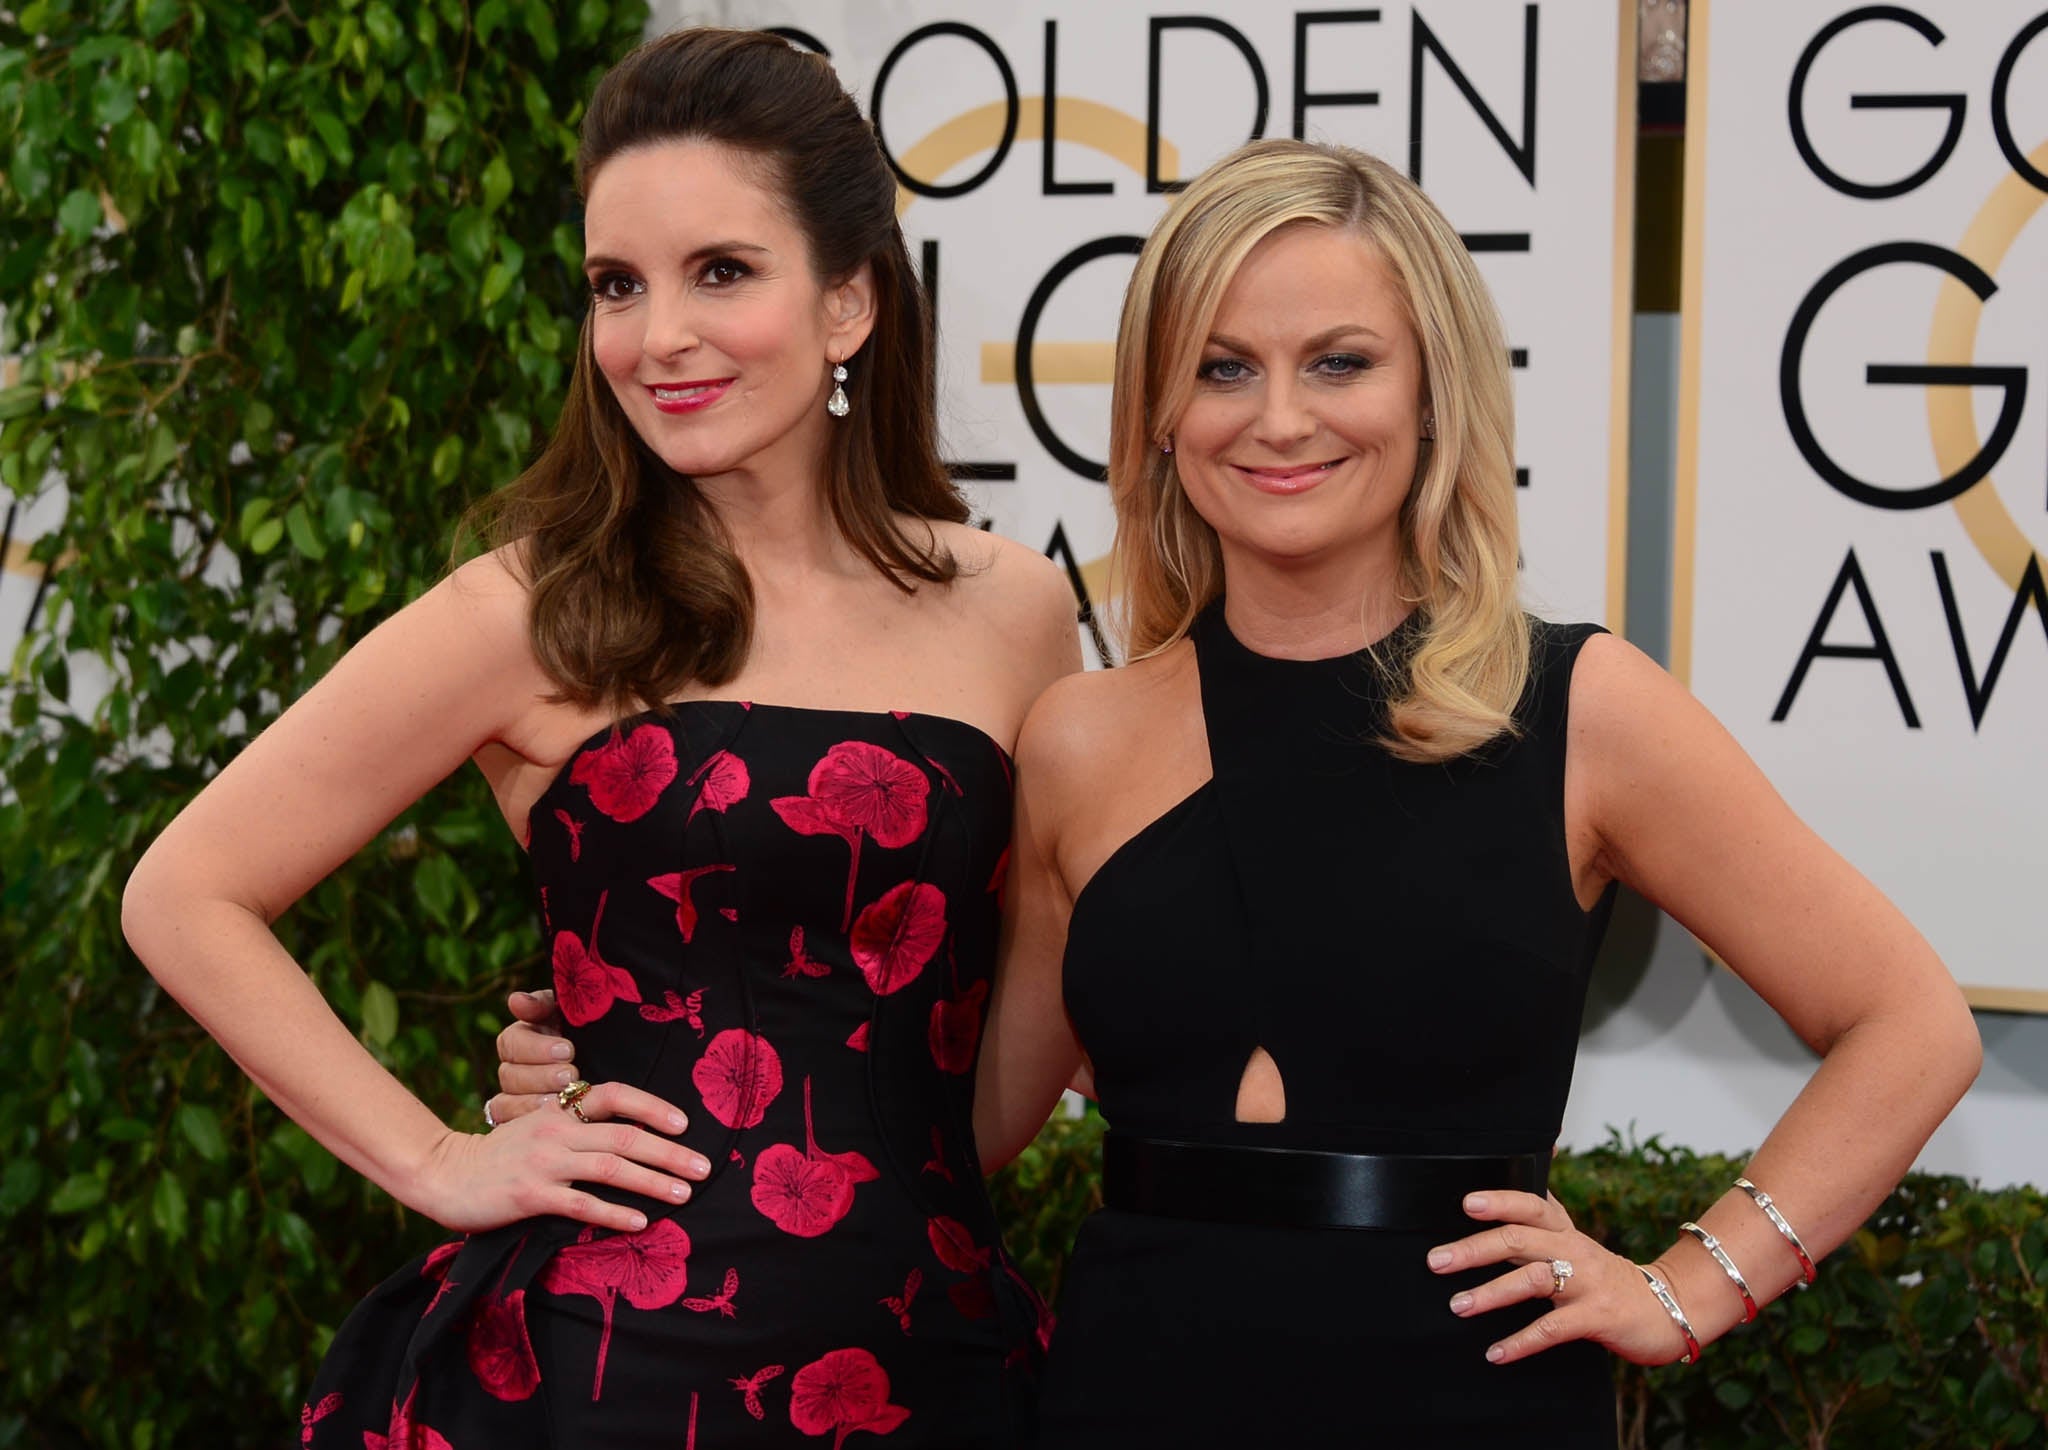 Tina Fey and Amy Poelher prepare for their hosting stint at the Golden Globe Awards 2014